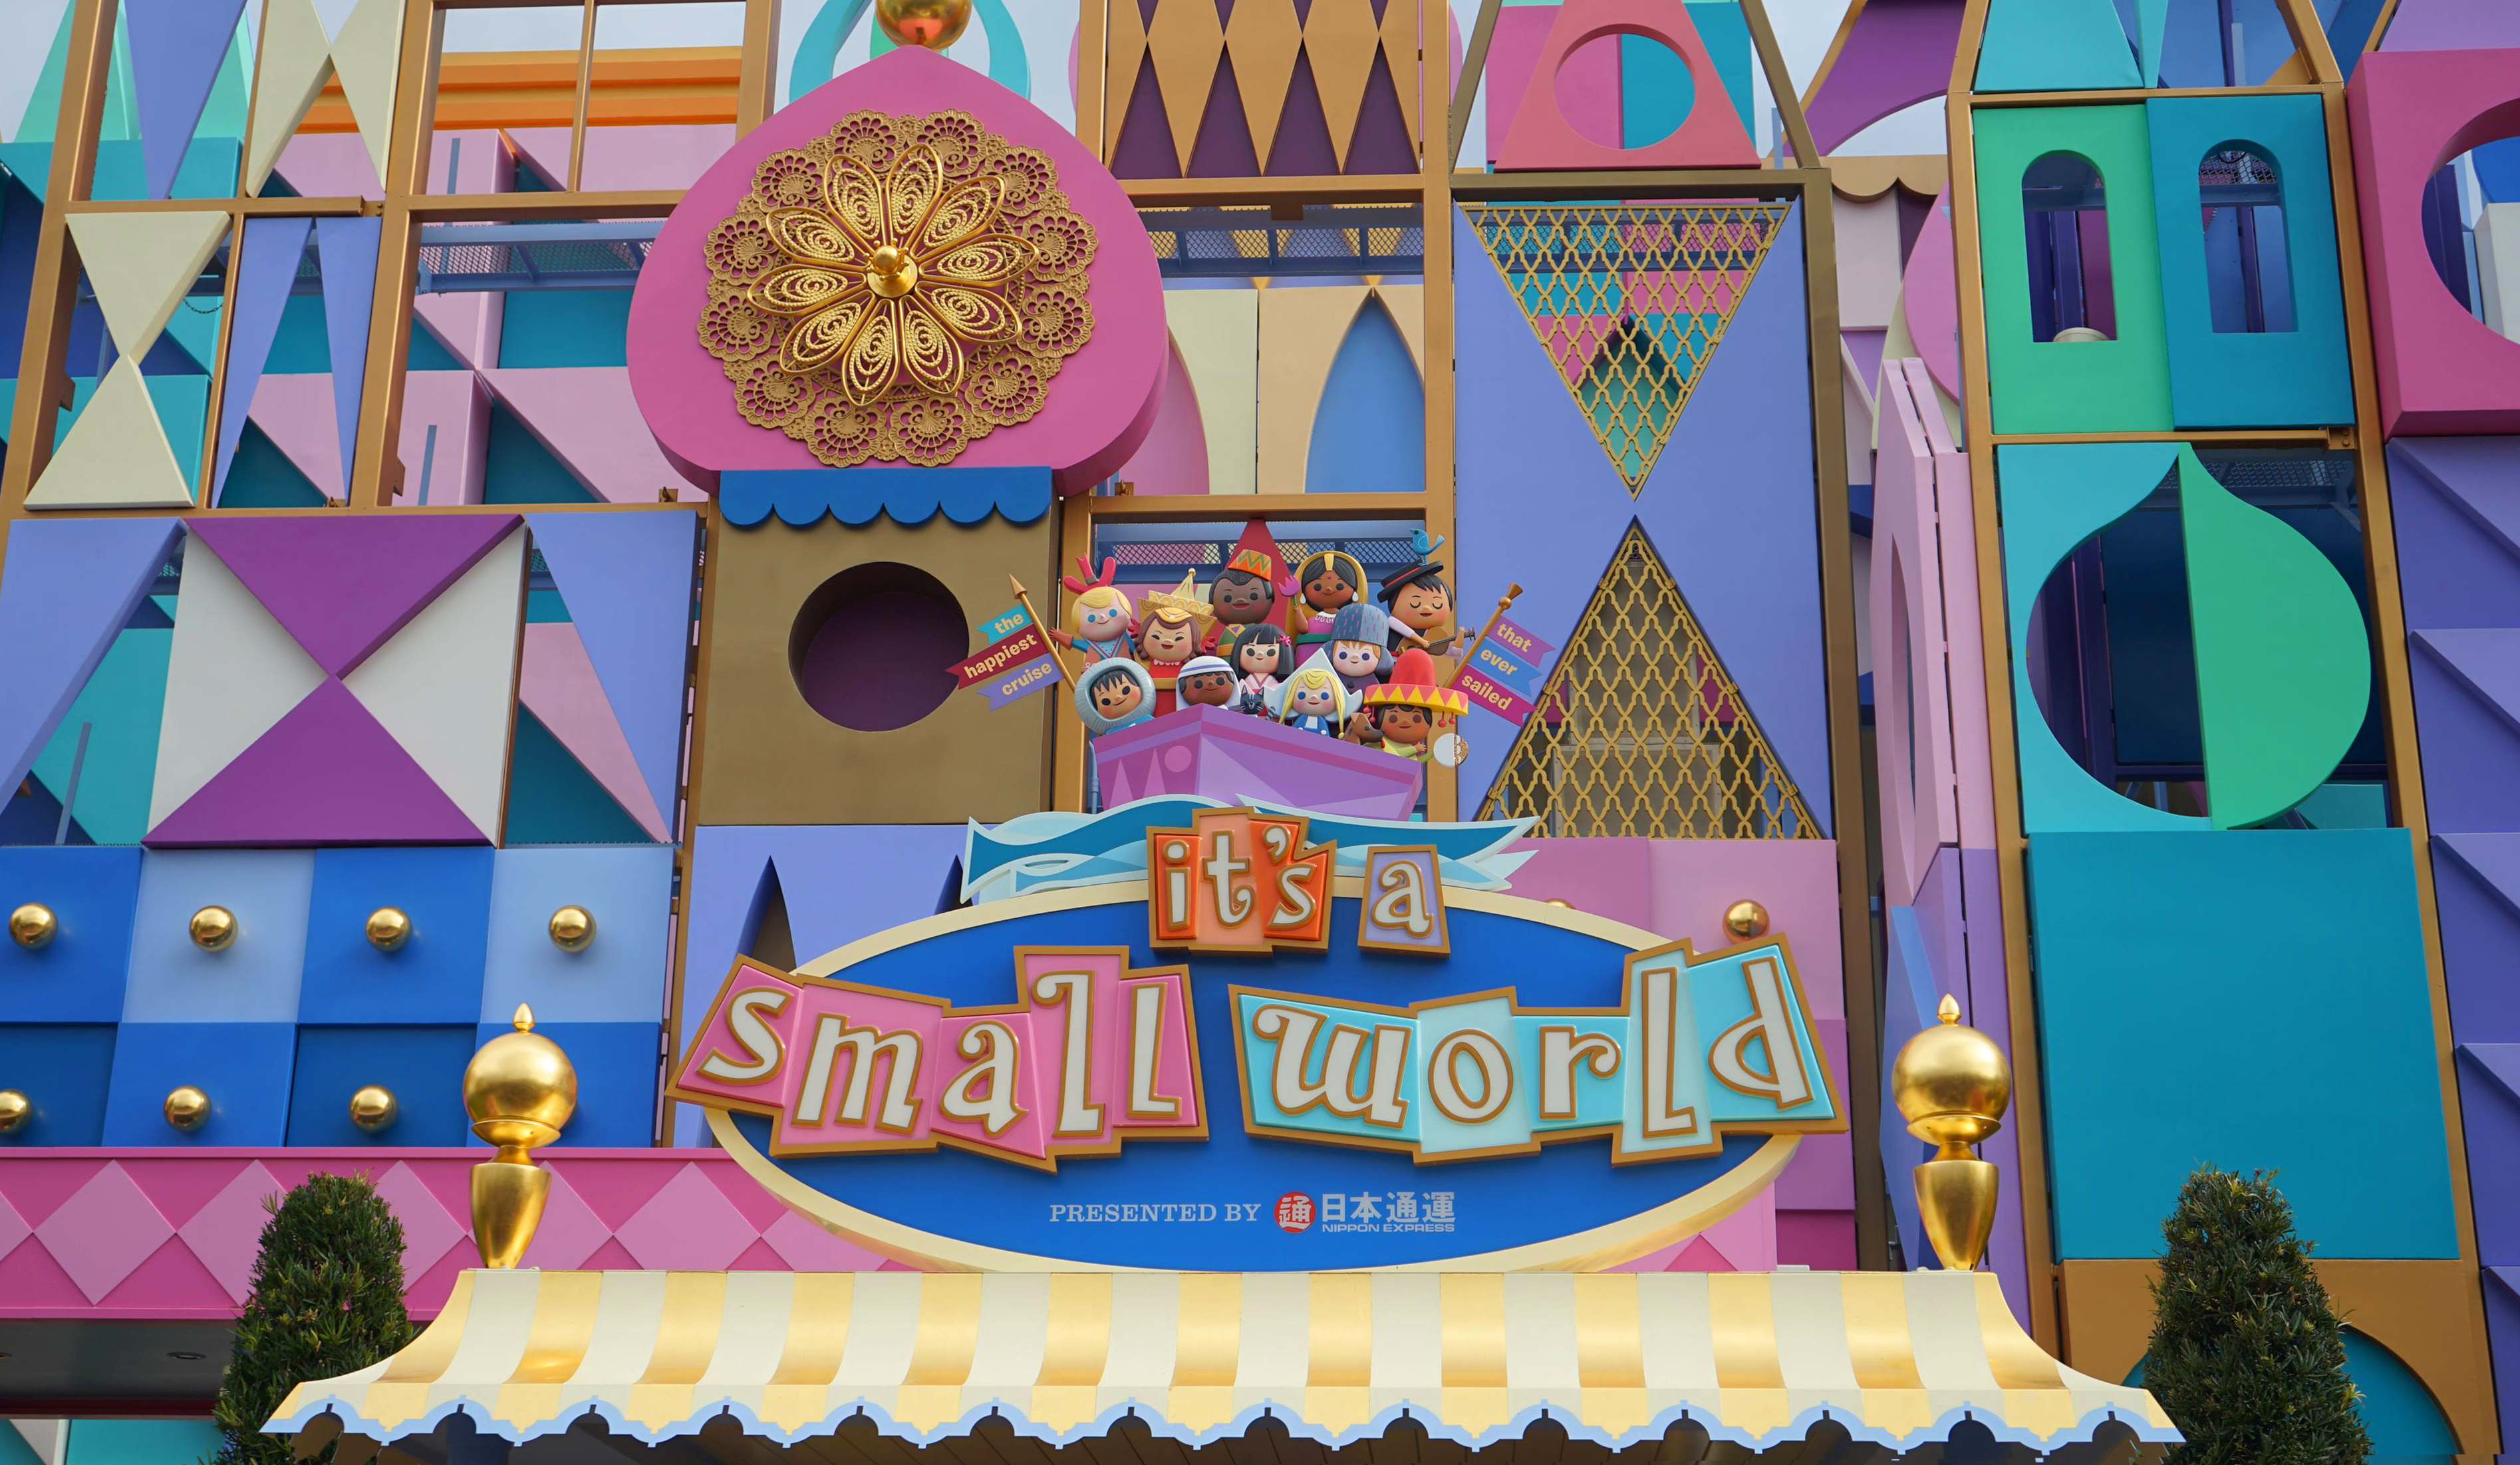 The colorful entrance of "it's a small world" in Tokyo Disneyland